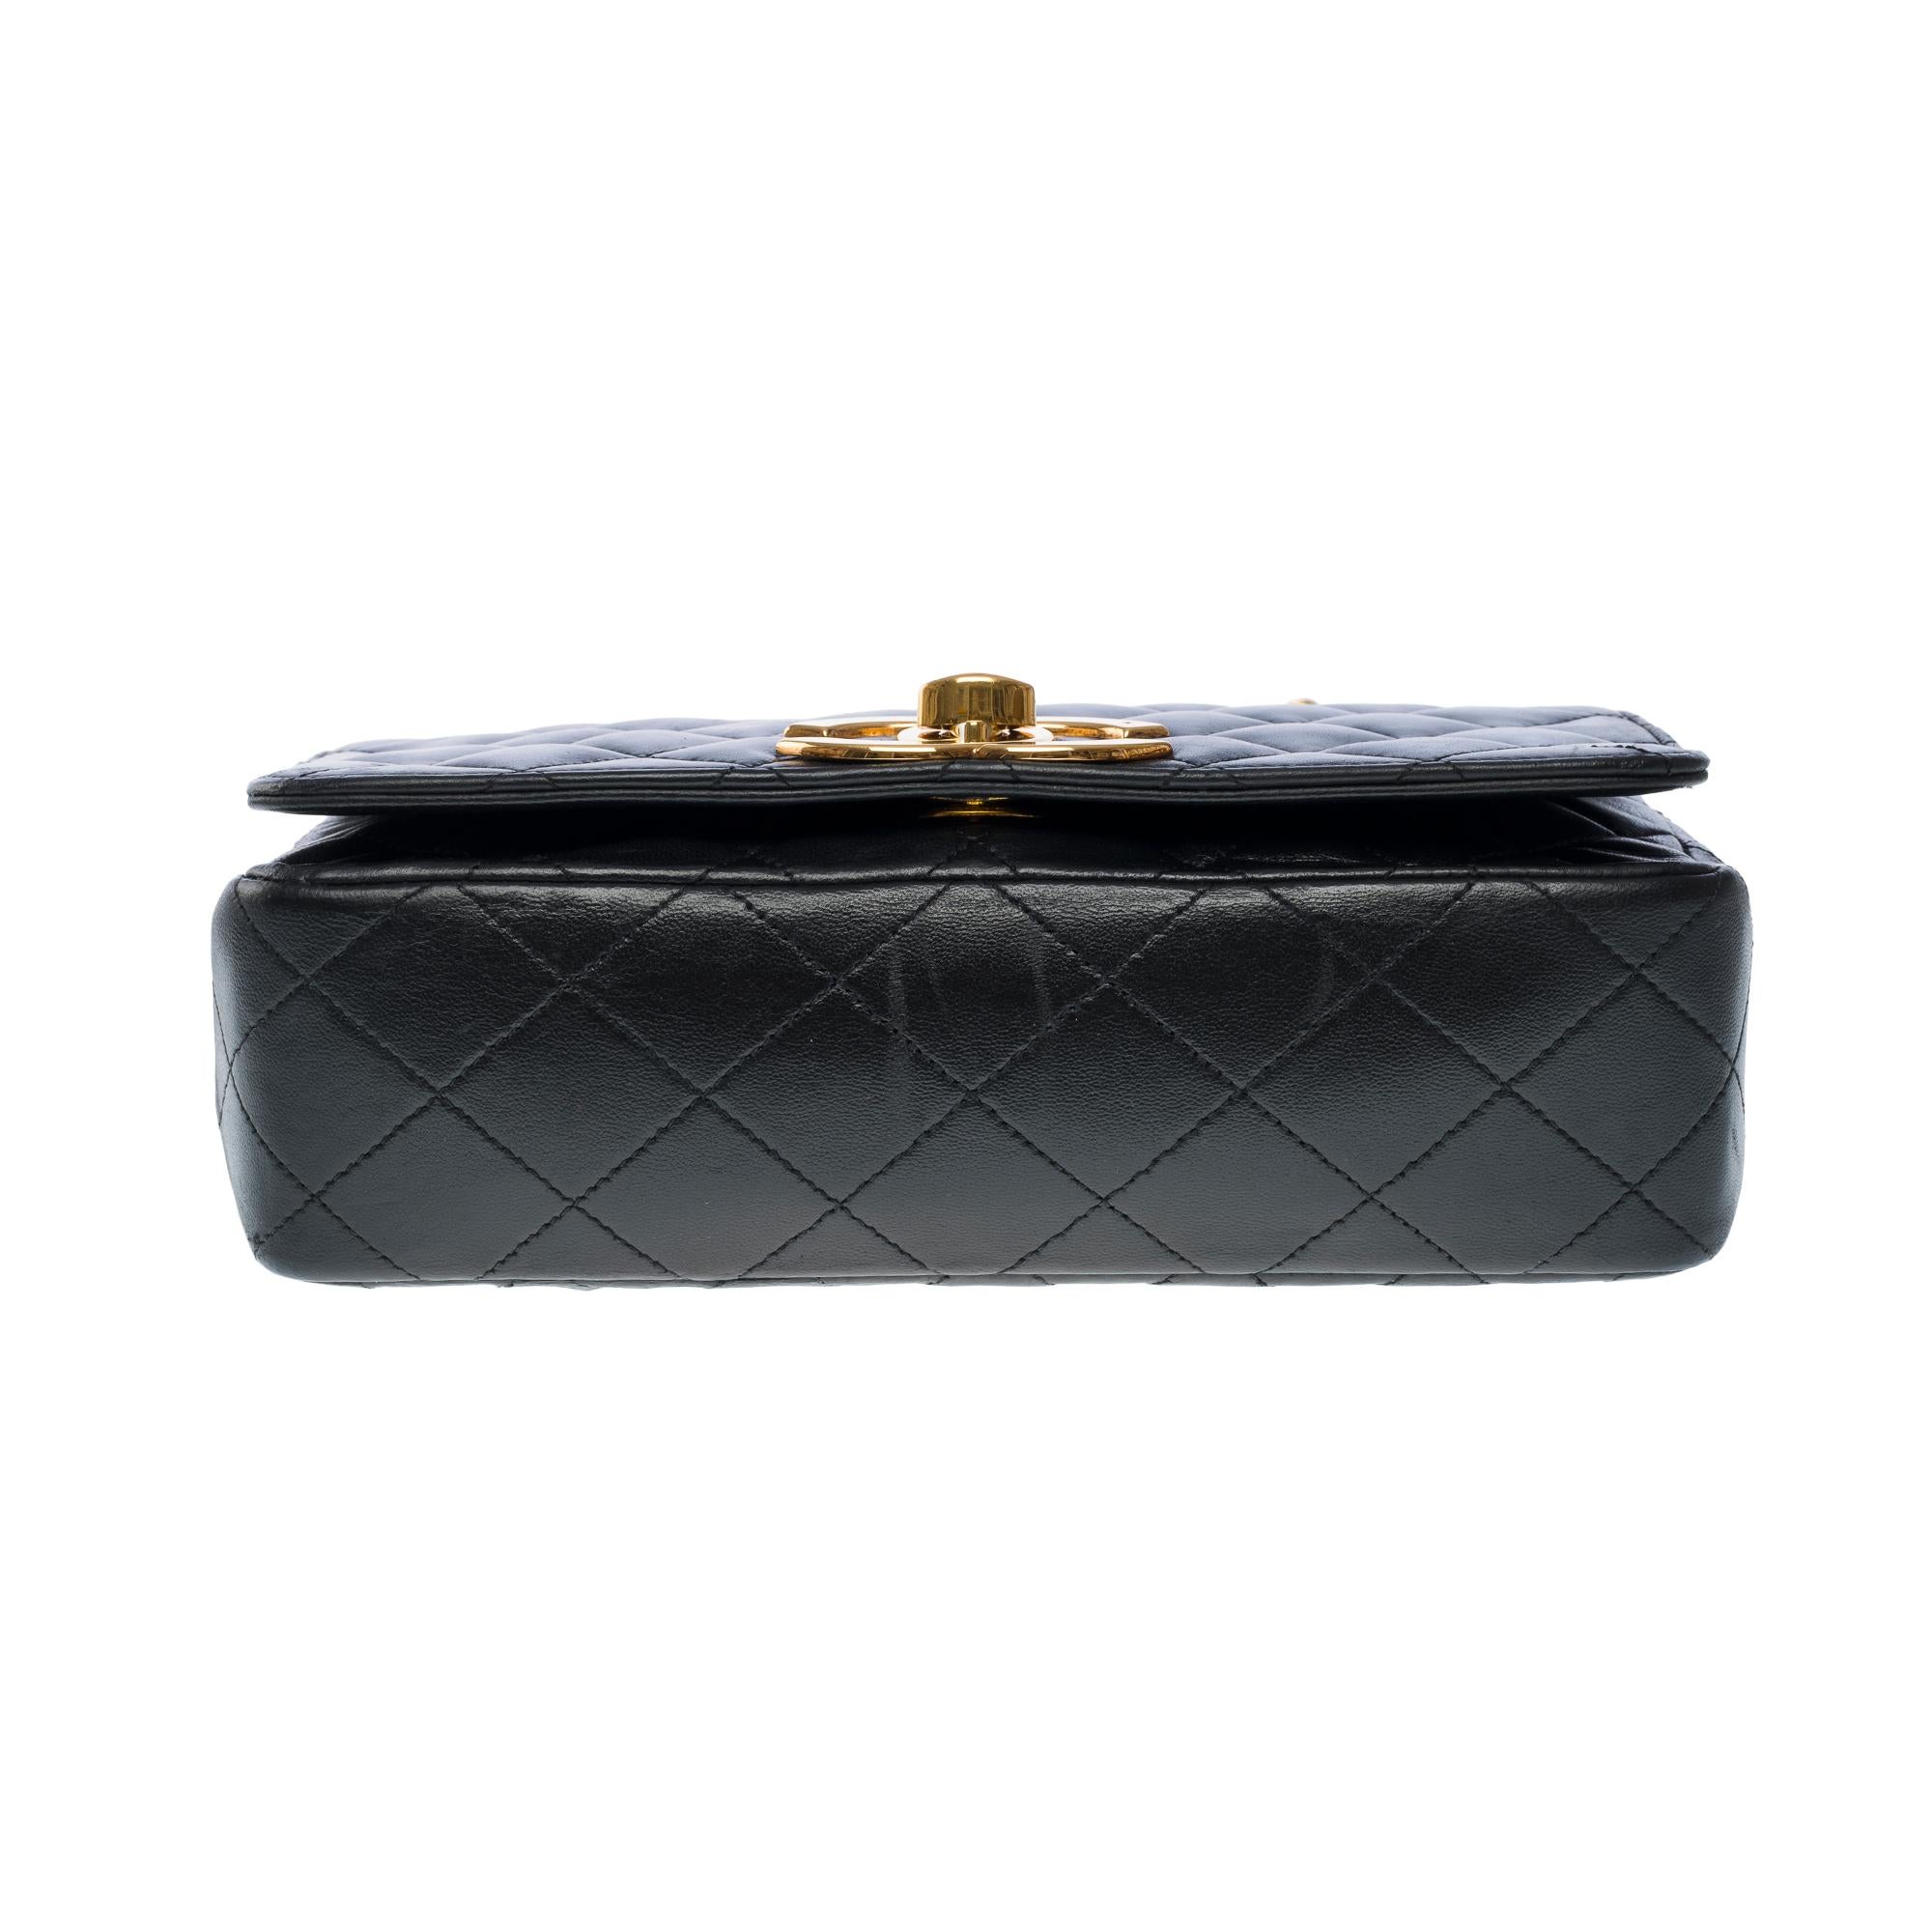 Chanel Classic Full Flap shoulder bag in black quilted lambskin leather, GHW For Sale 7